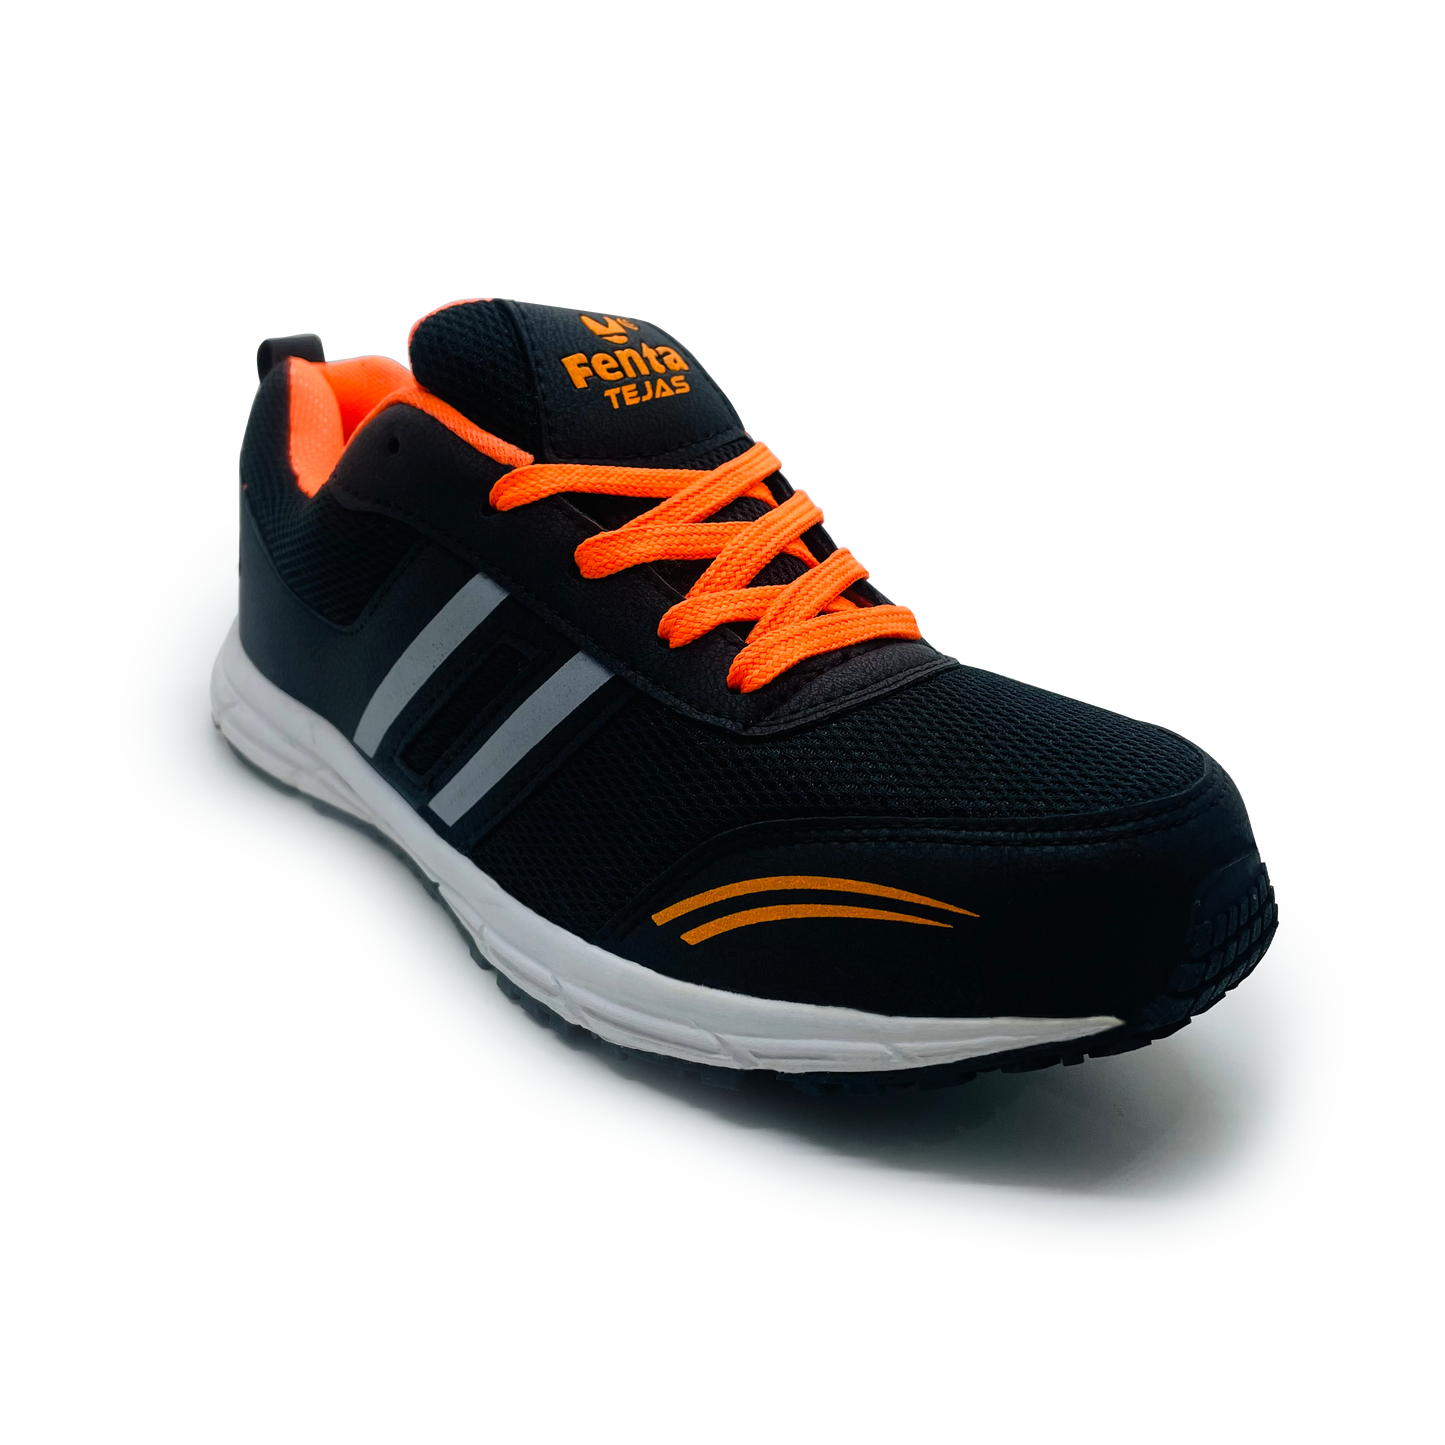 Tejas Unisex Running/Jogging/Gym/Indore Outdor Shoes